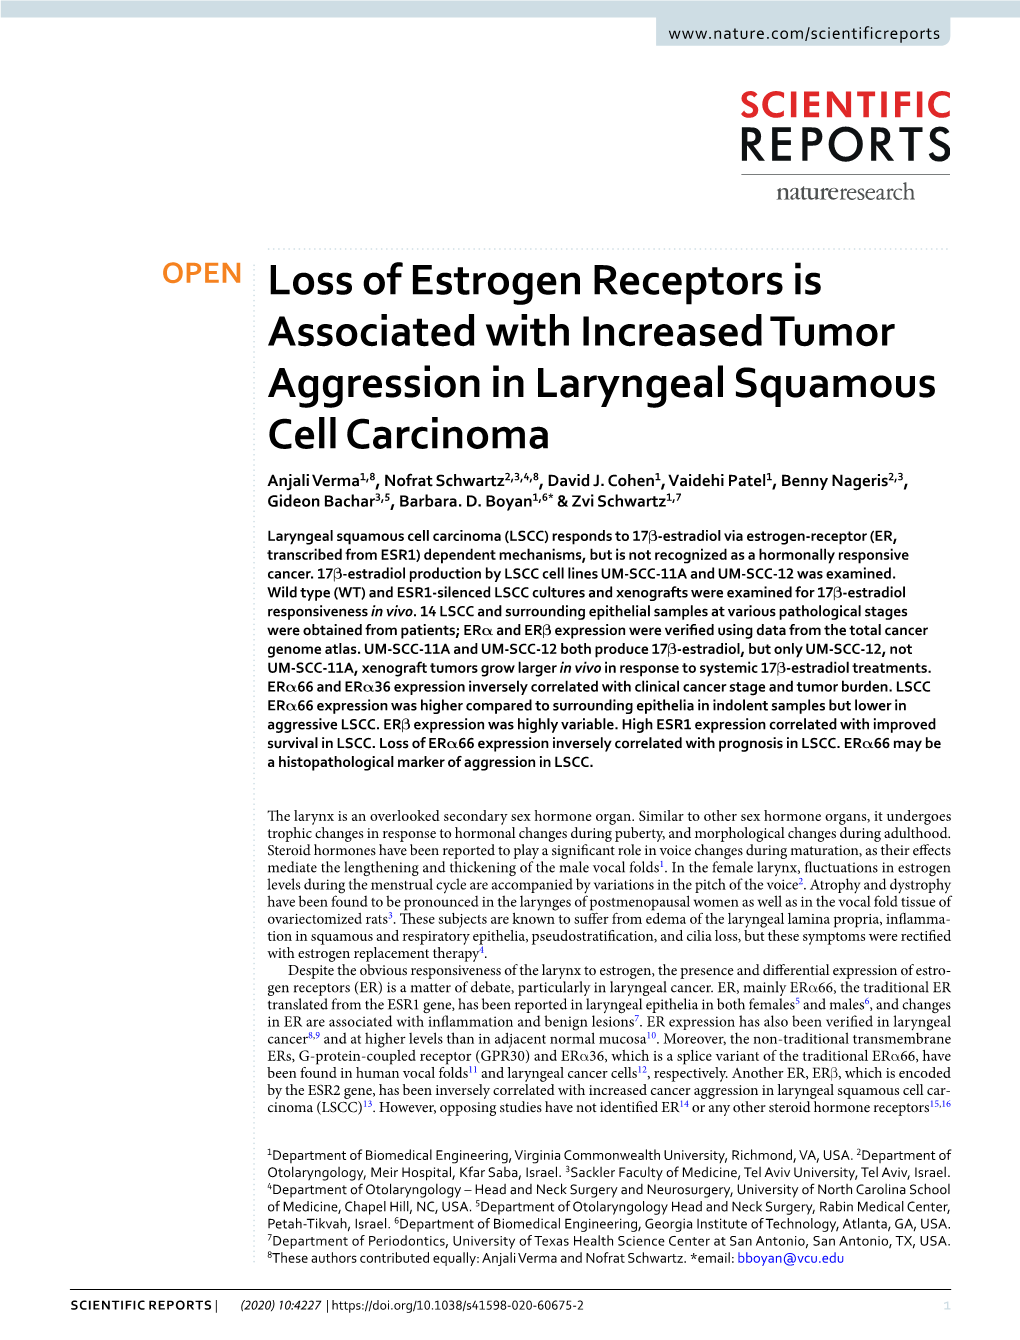 Loss of Estrogen Receptors Is Associated with Increased Tumor Aggression in Laryngeal Squamous Cell Carcinoma Anjali Verma1,8, Nofrat Schwartz2,3,4,8, David J